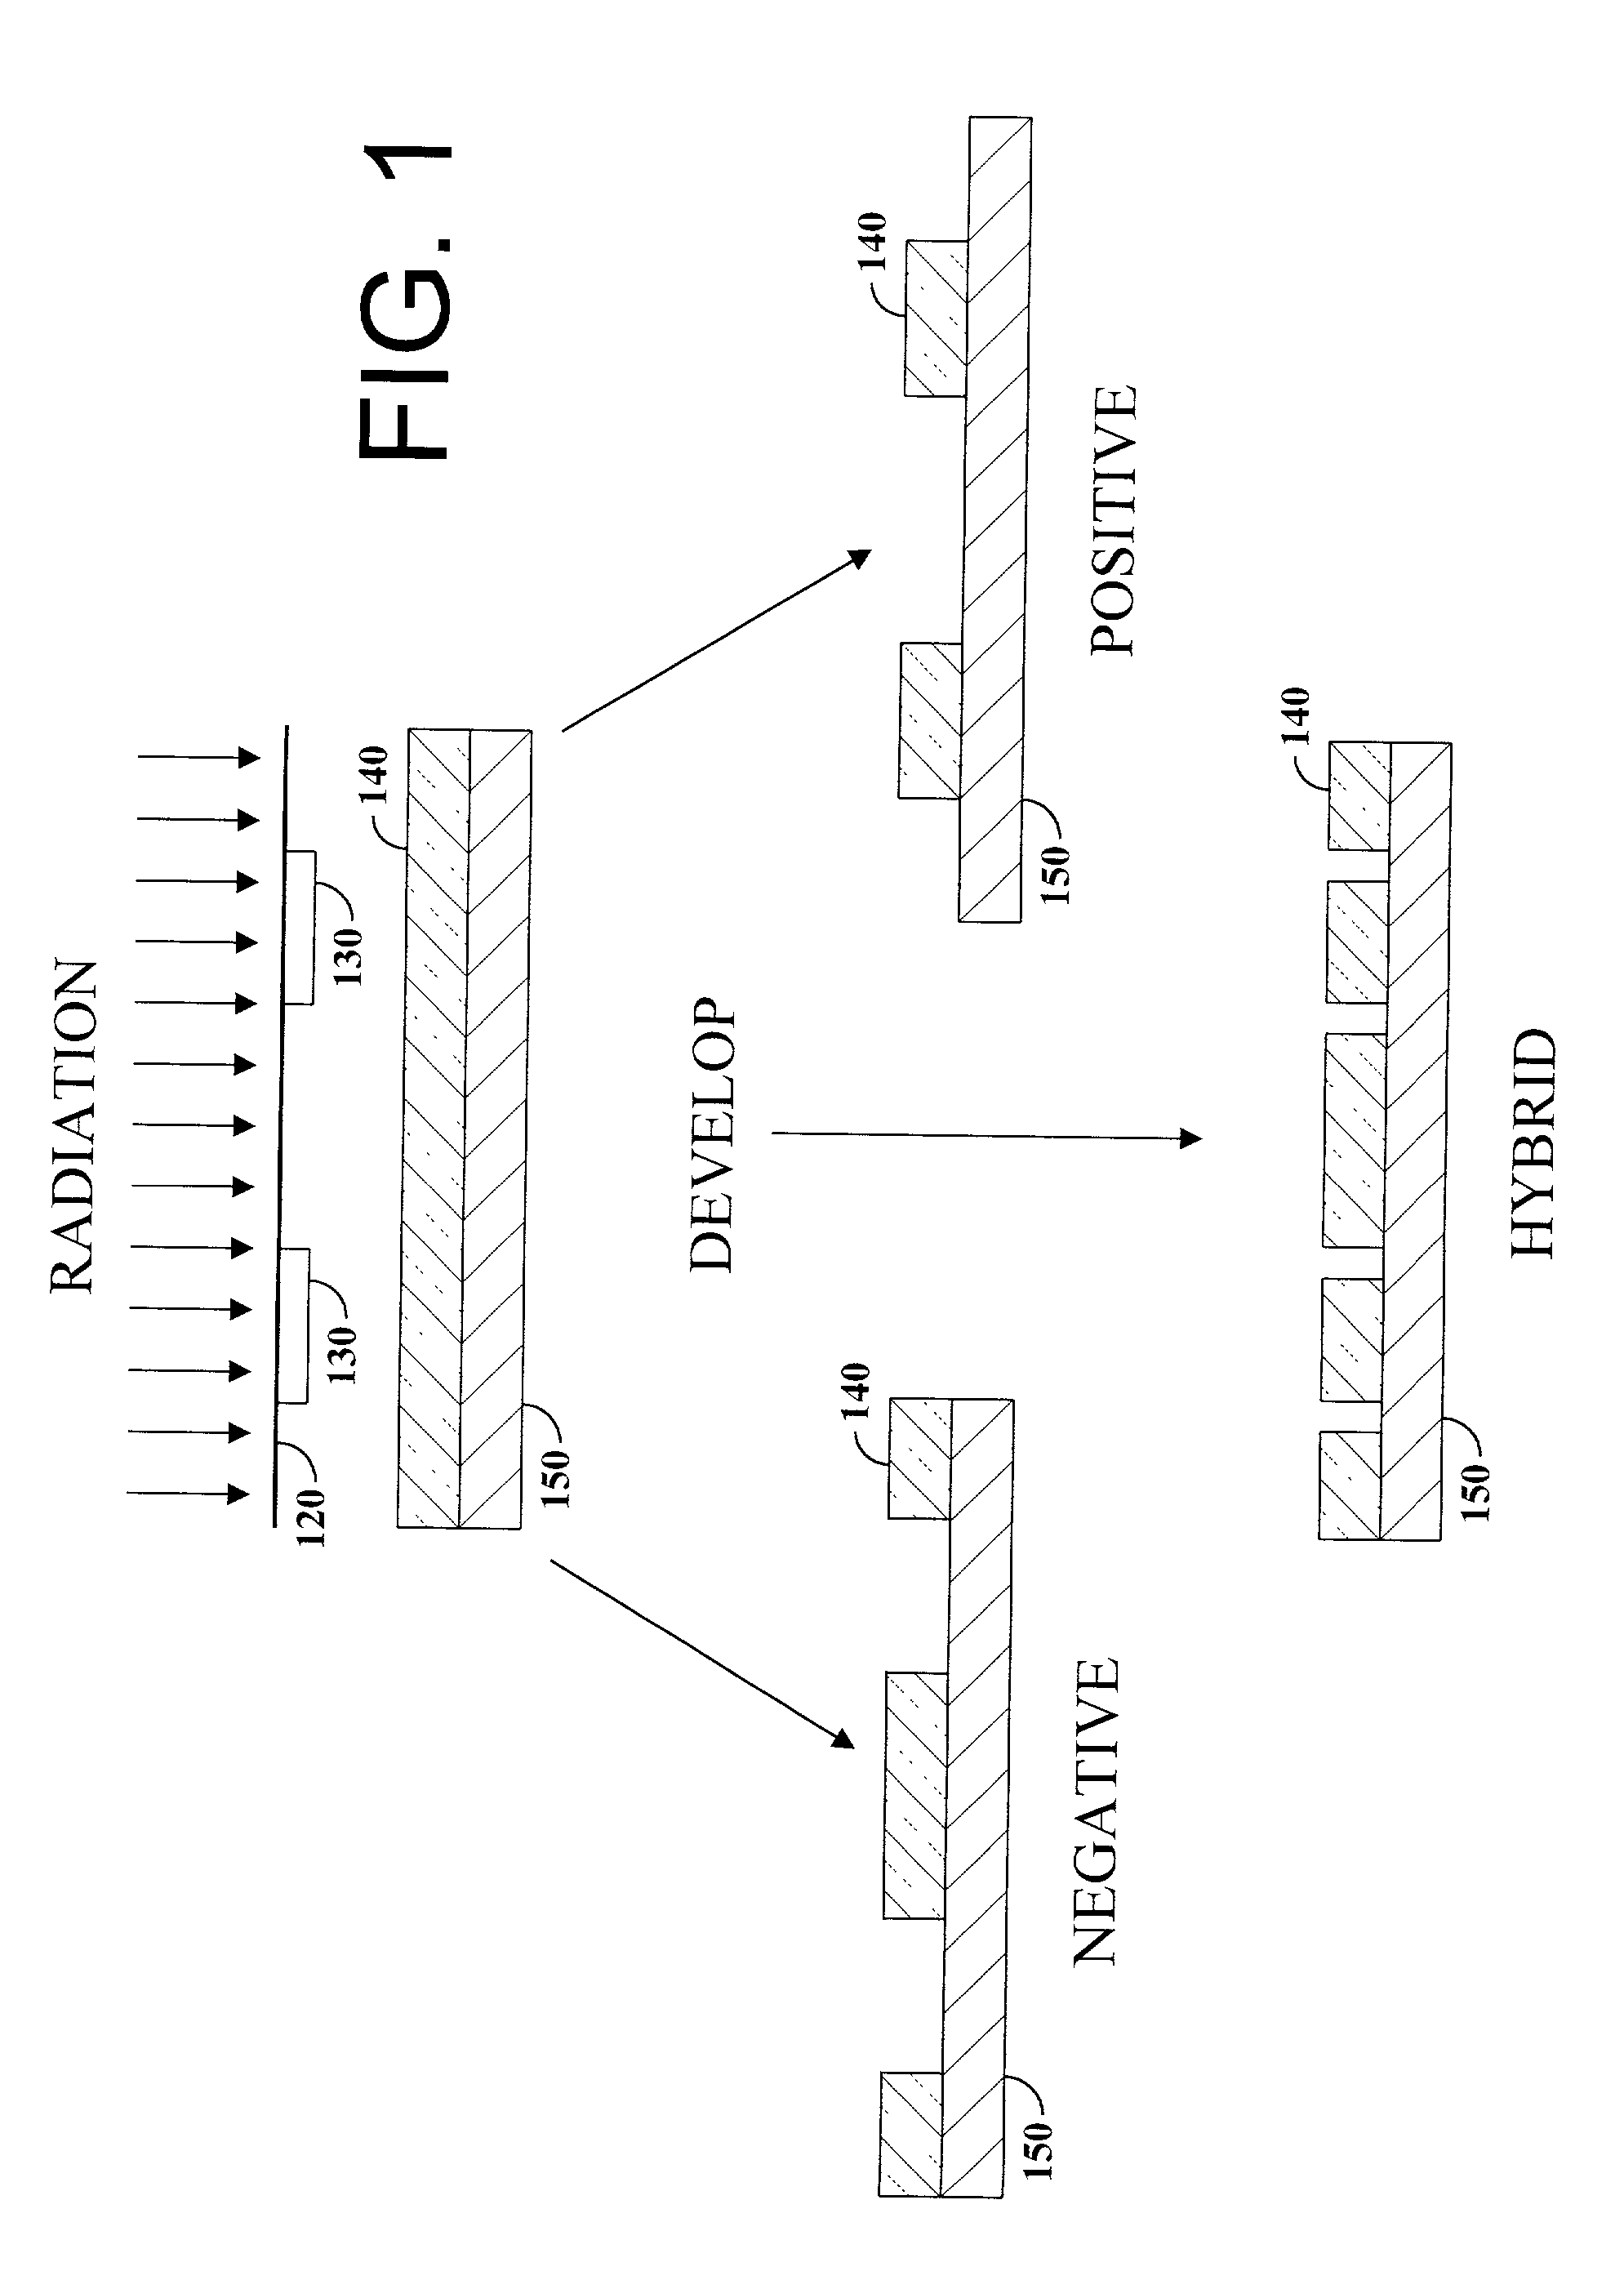 Fabrication of a high density long channel dram gate with or without a grooved gate